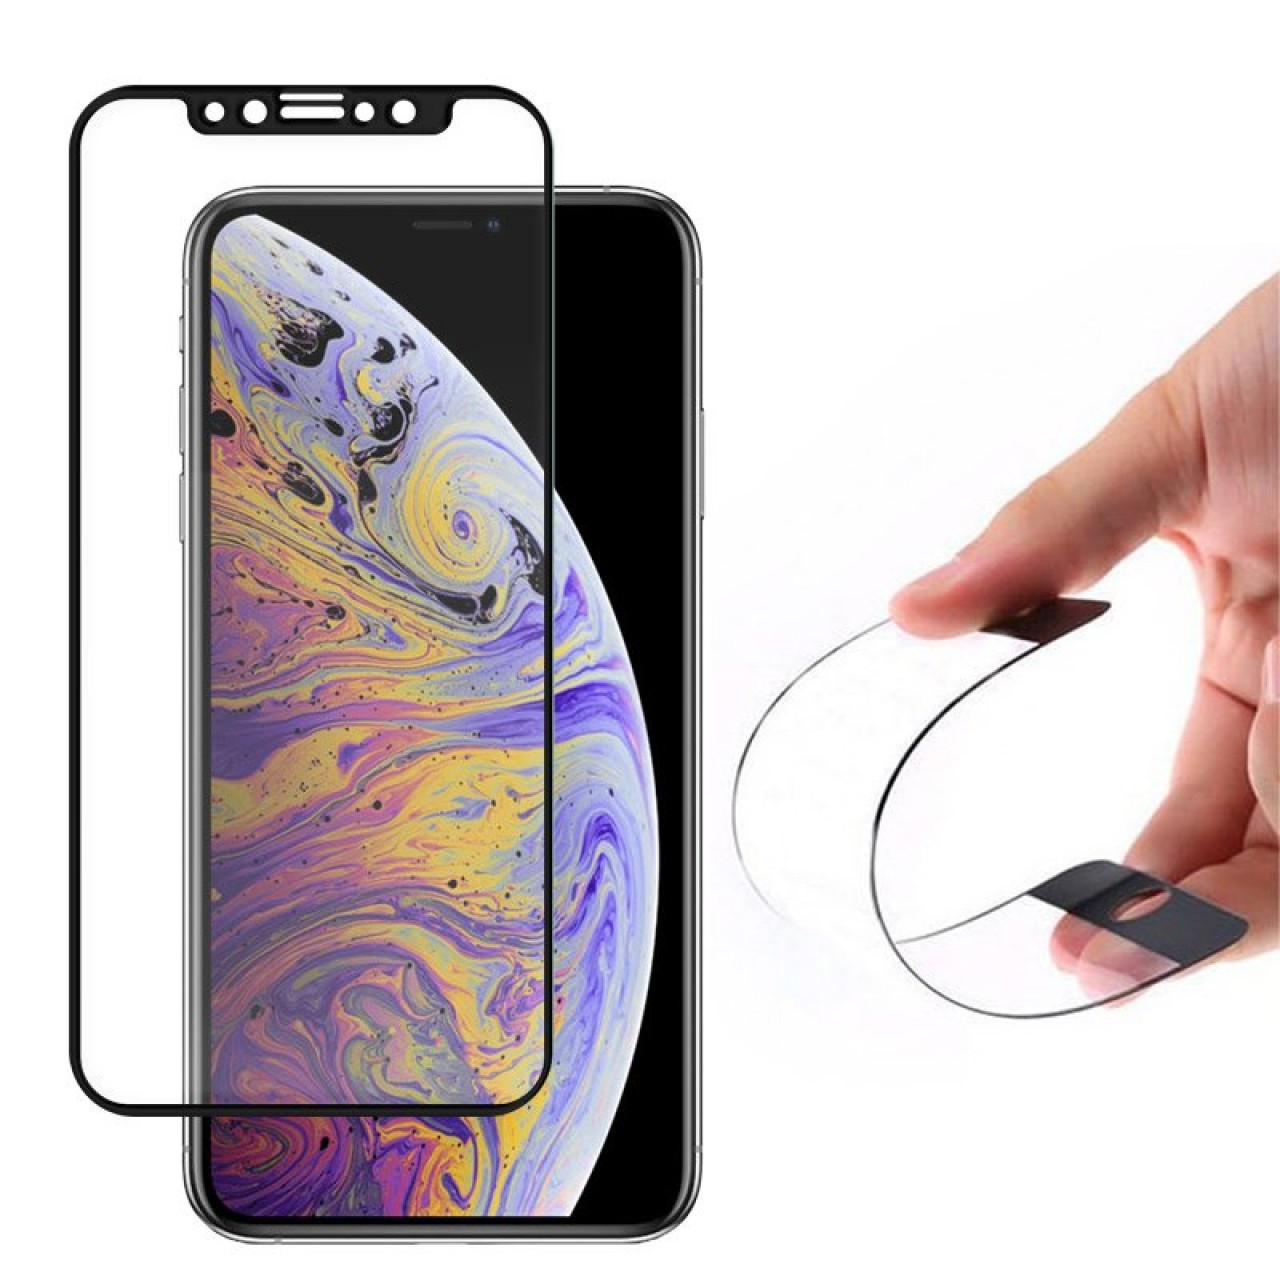 Tempered Glass (Τζάμι) - Προστασία Οθόνης για iphone XS Max / 11 Pro MAX Full Cover Flexi Nano Glass Hybrid Screen Protector with frame - 4882 - Wozinsky